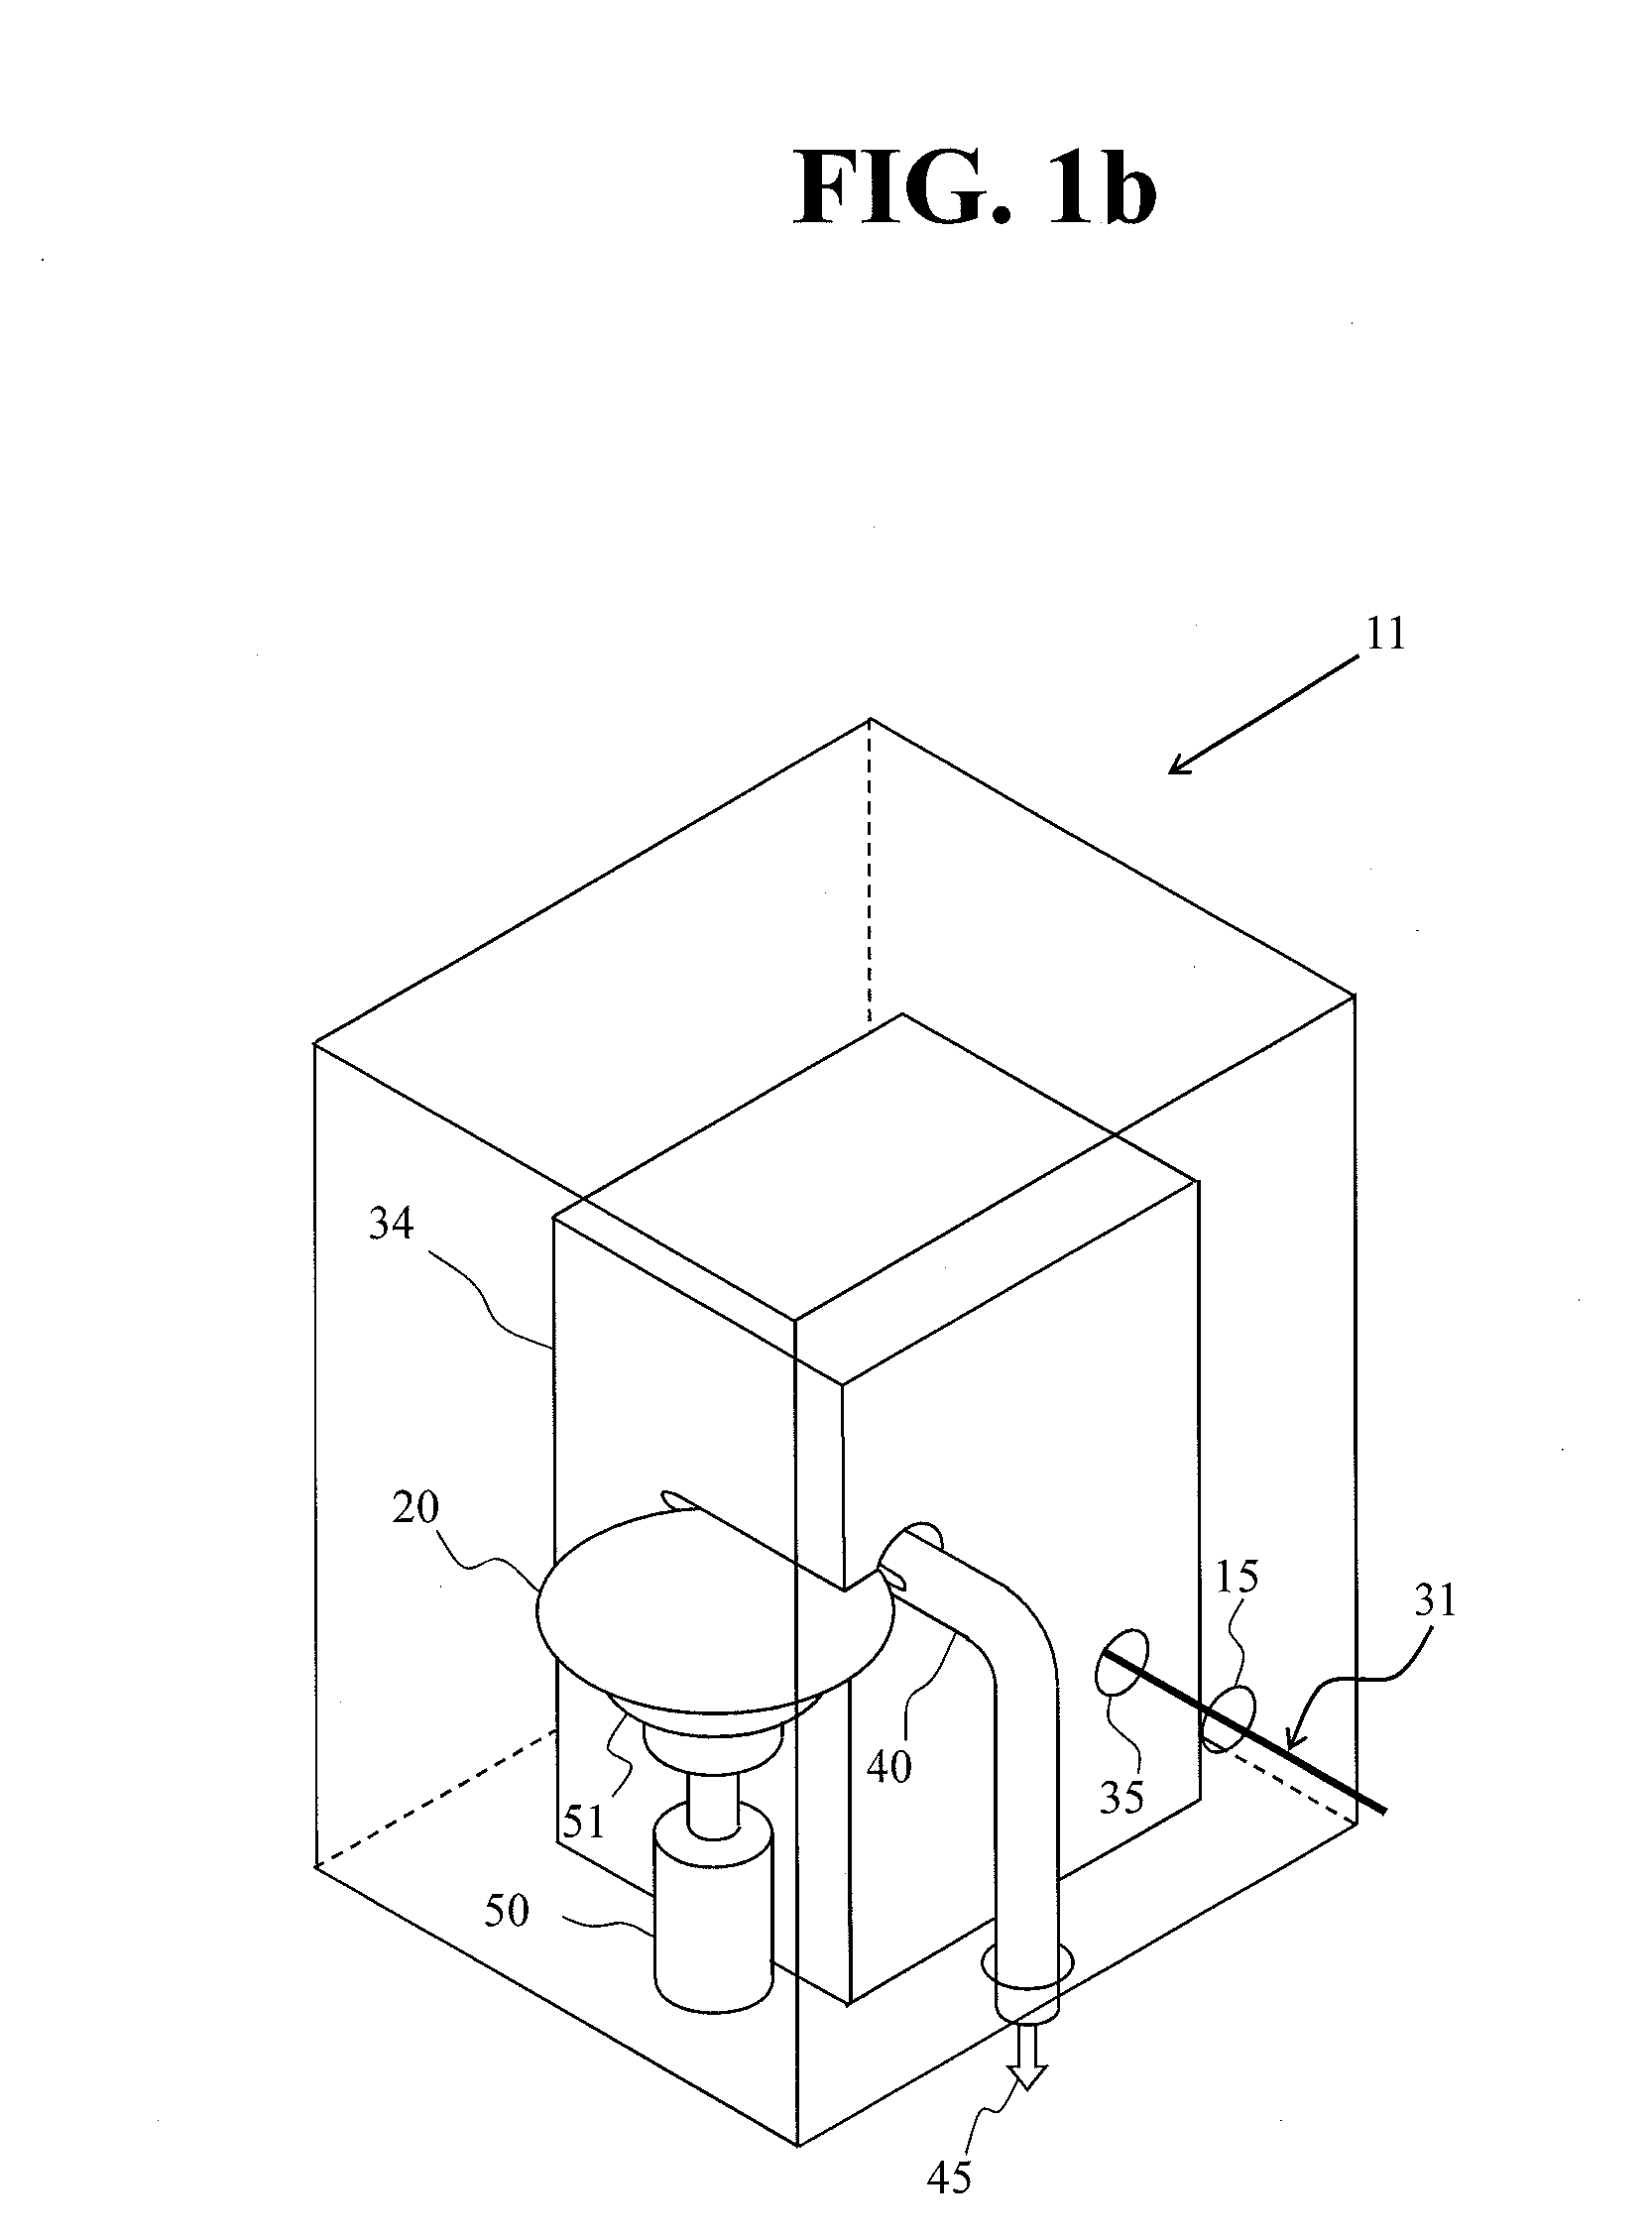 Modular apparatus for wafer edge processing